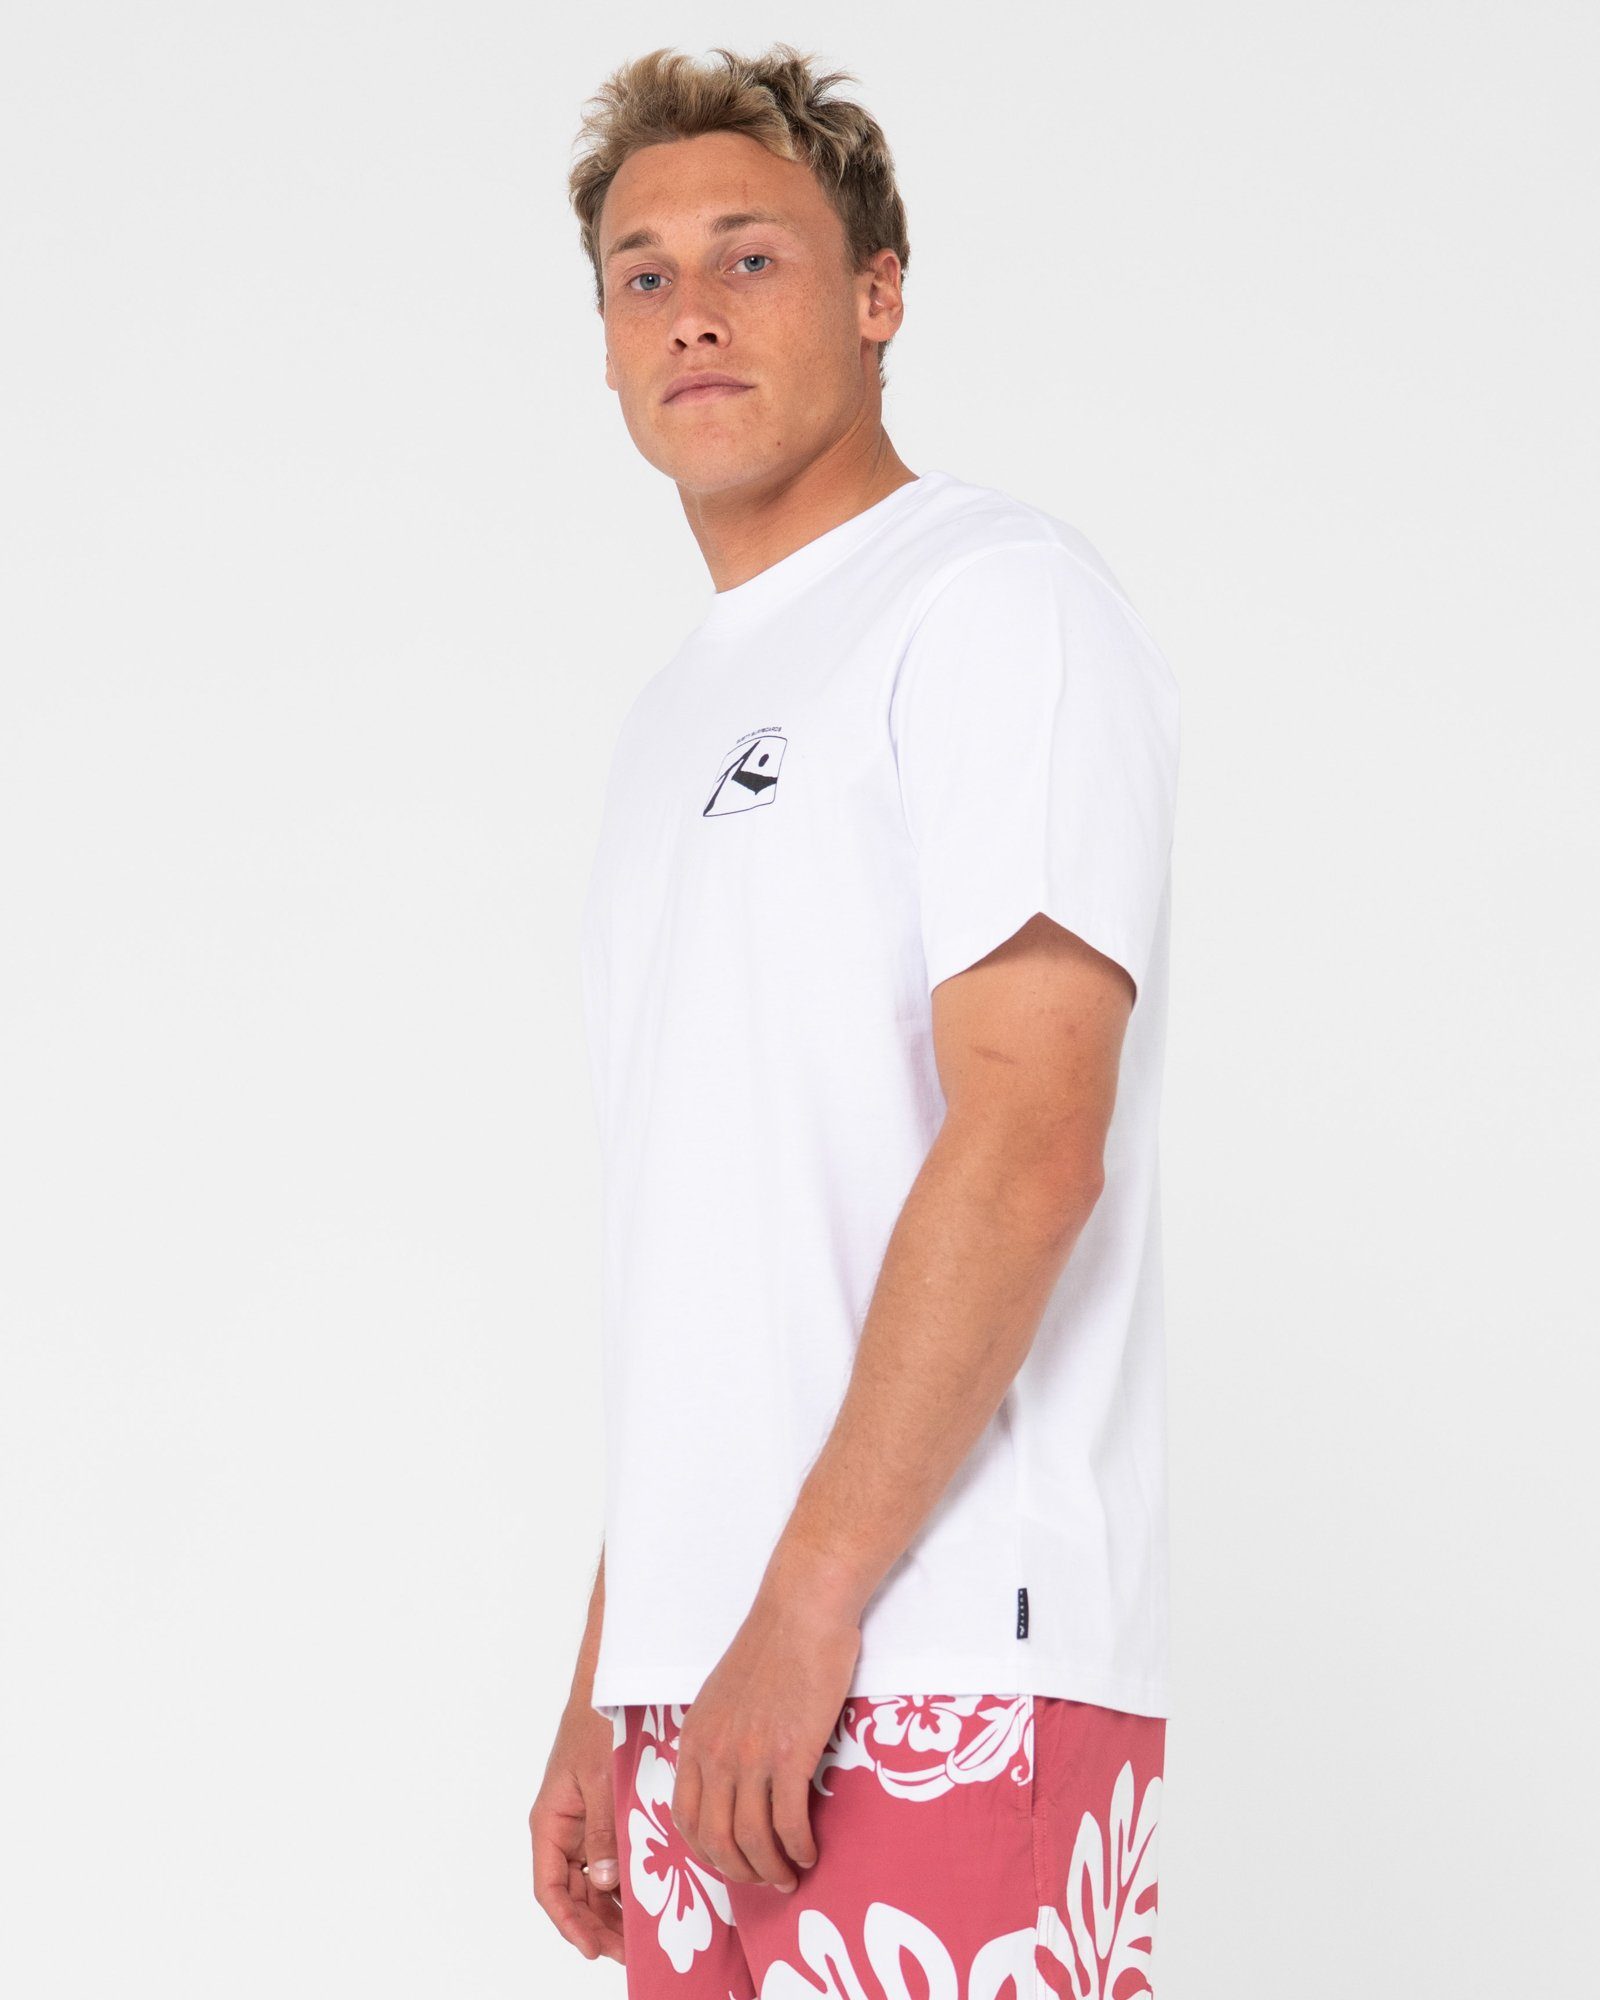 Rusty T-Shirt ADVOCATE White / SLEEVE TEE Red SHORT